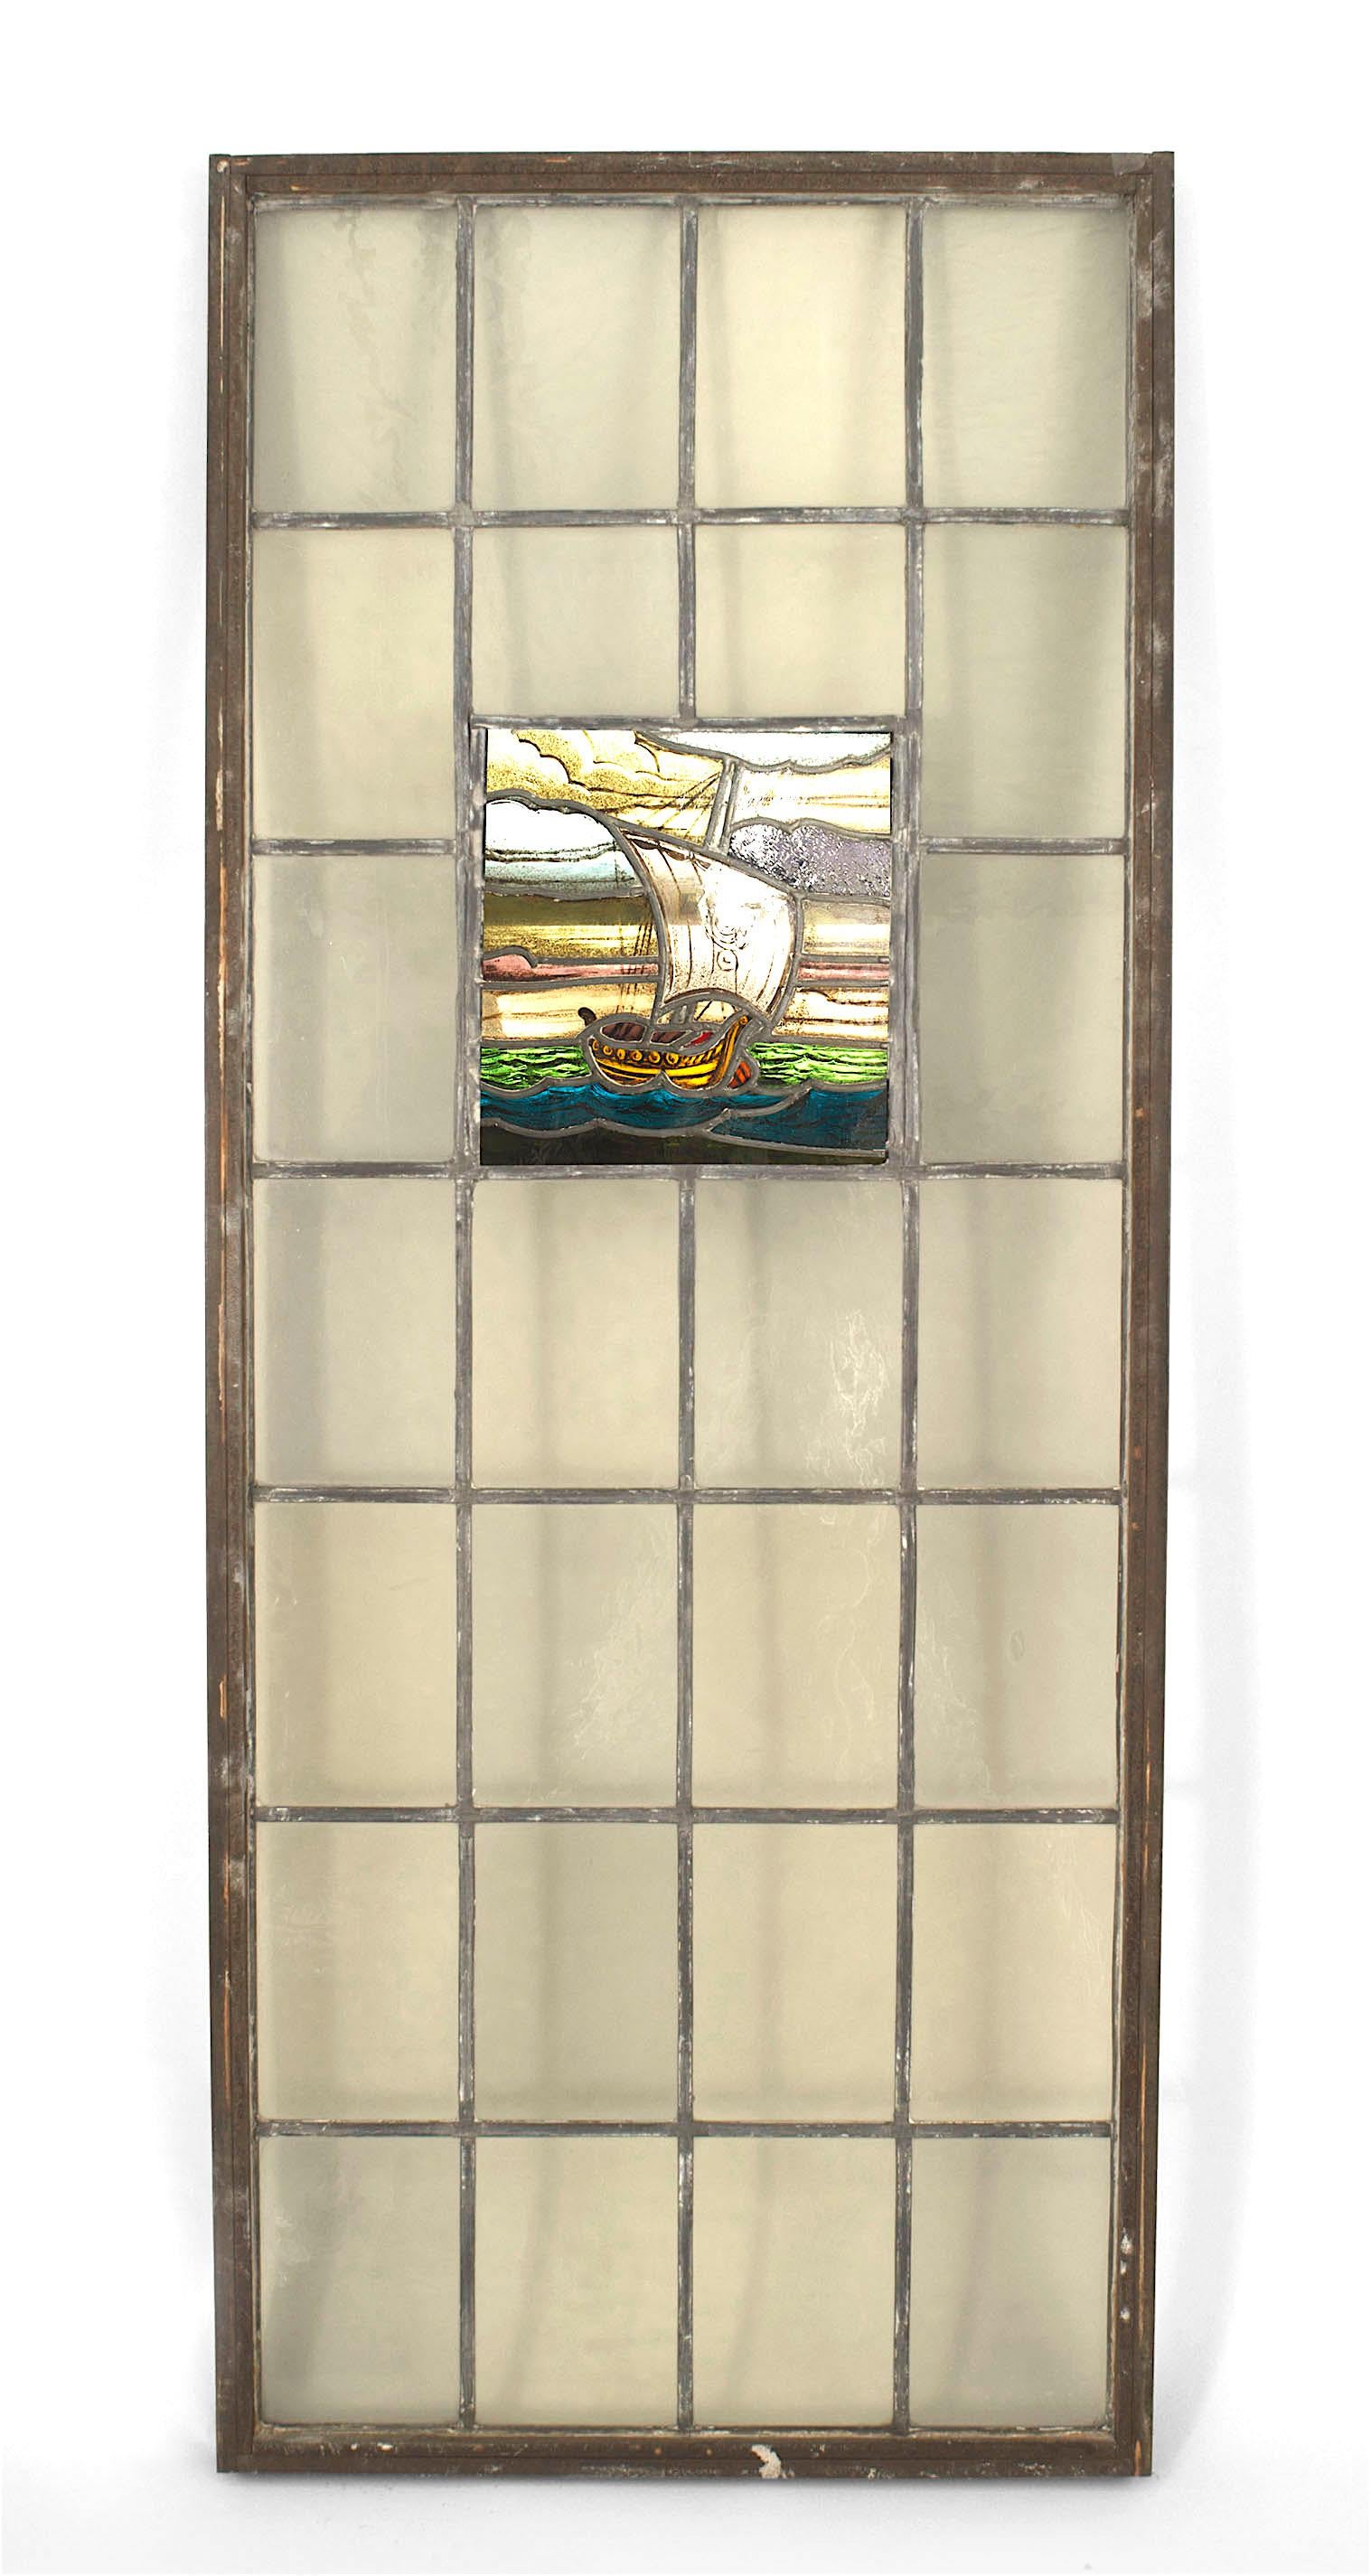 English Arts & Crafts Stained glass and leaded window featuring a viking sailboat in a grid of clear panels.
